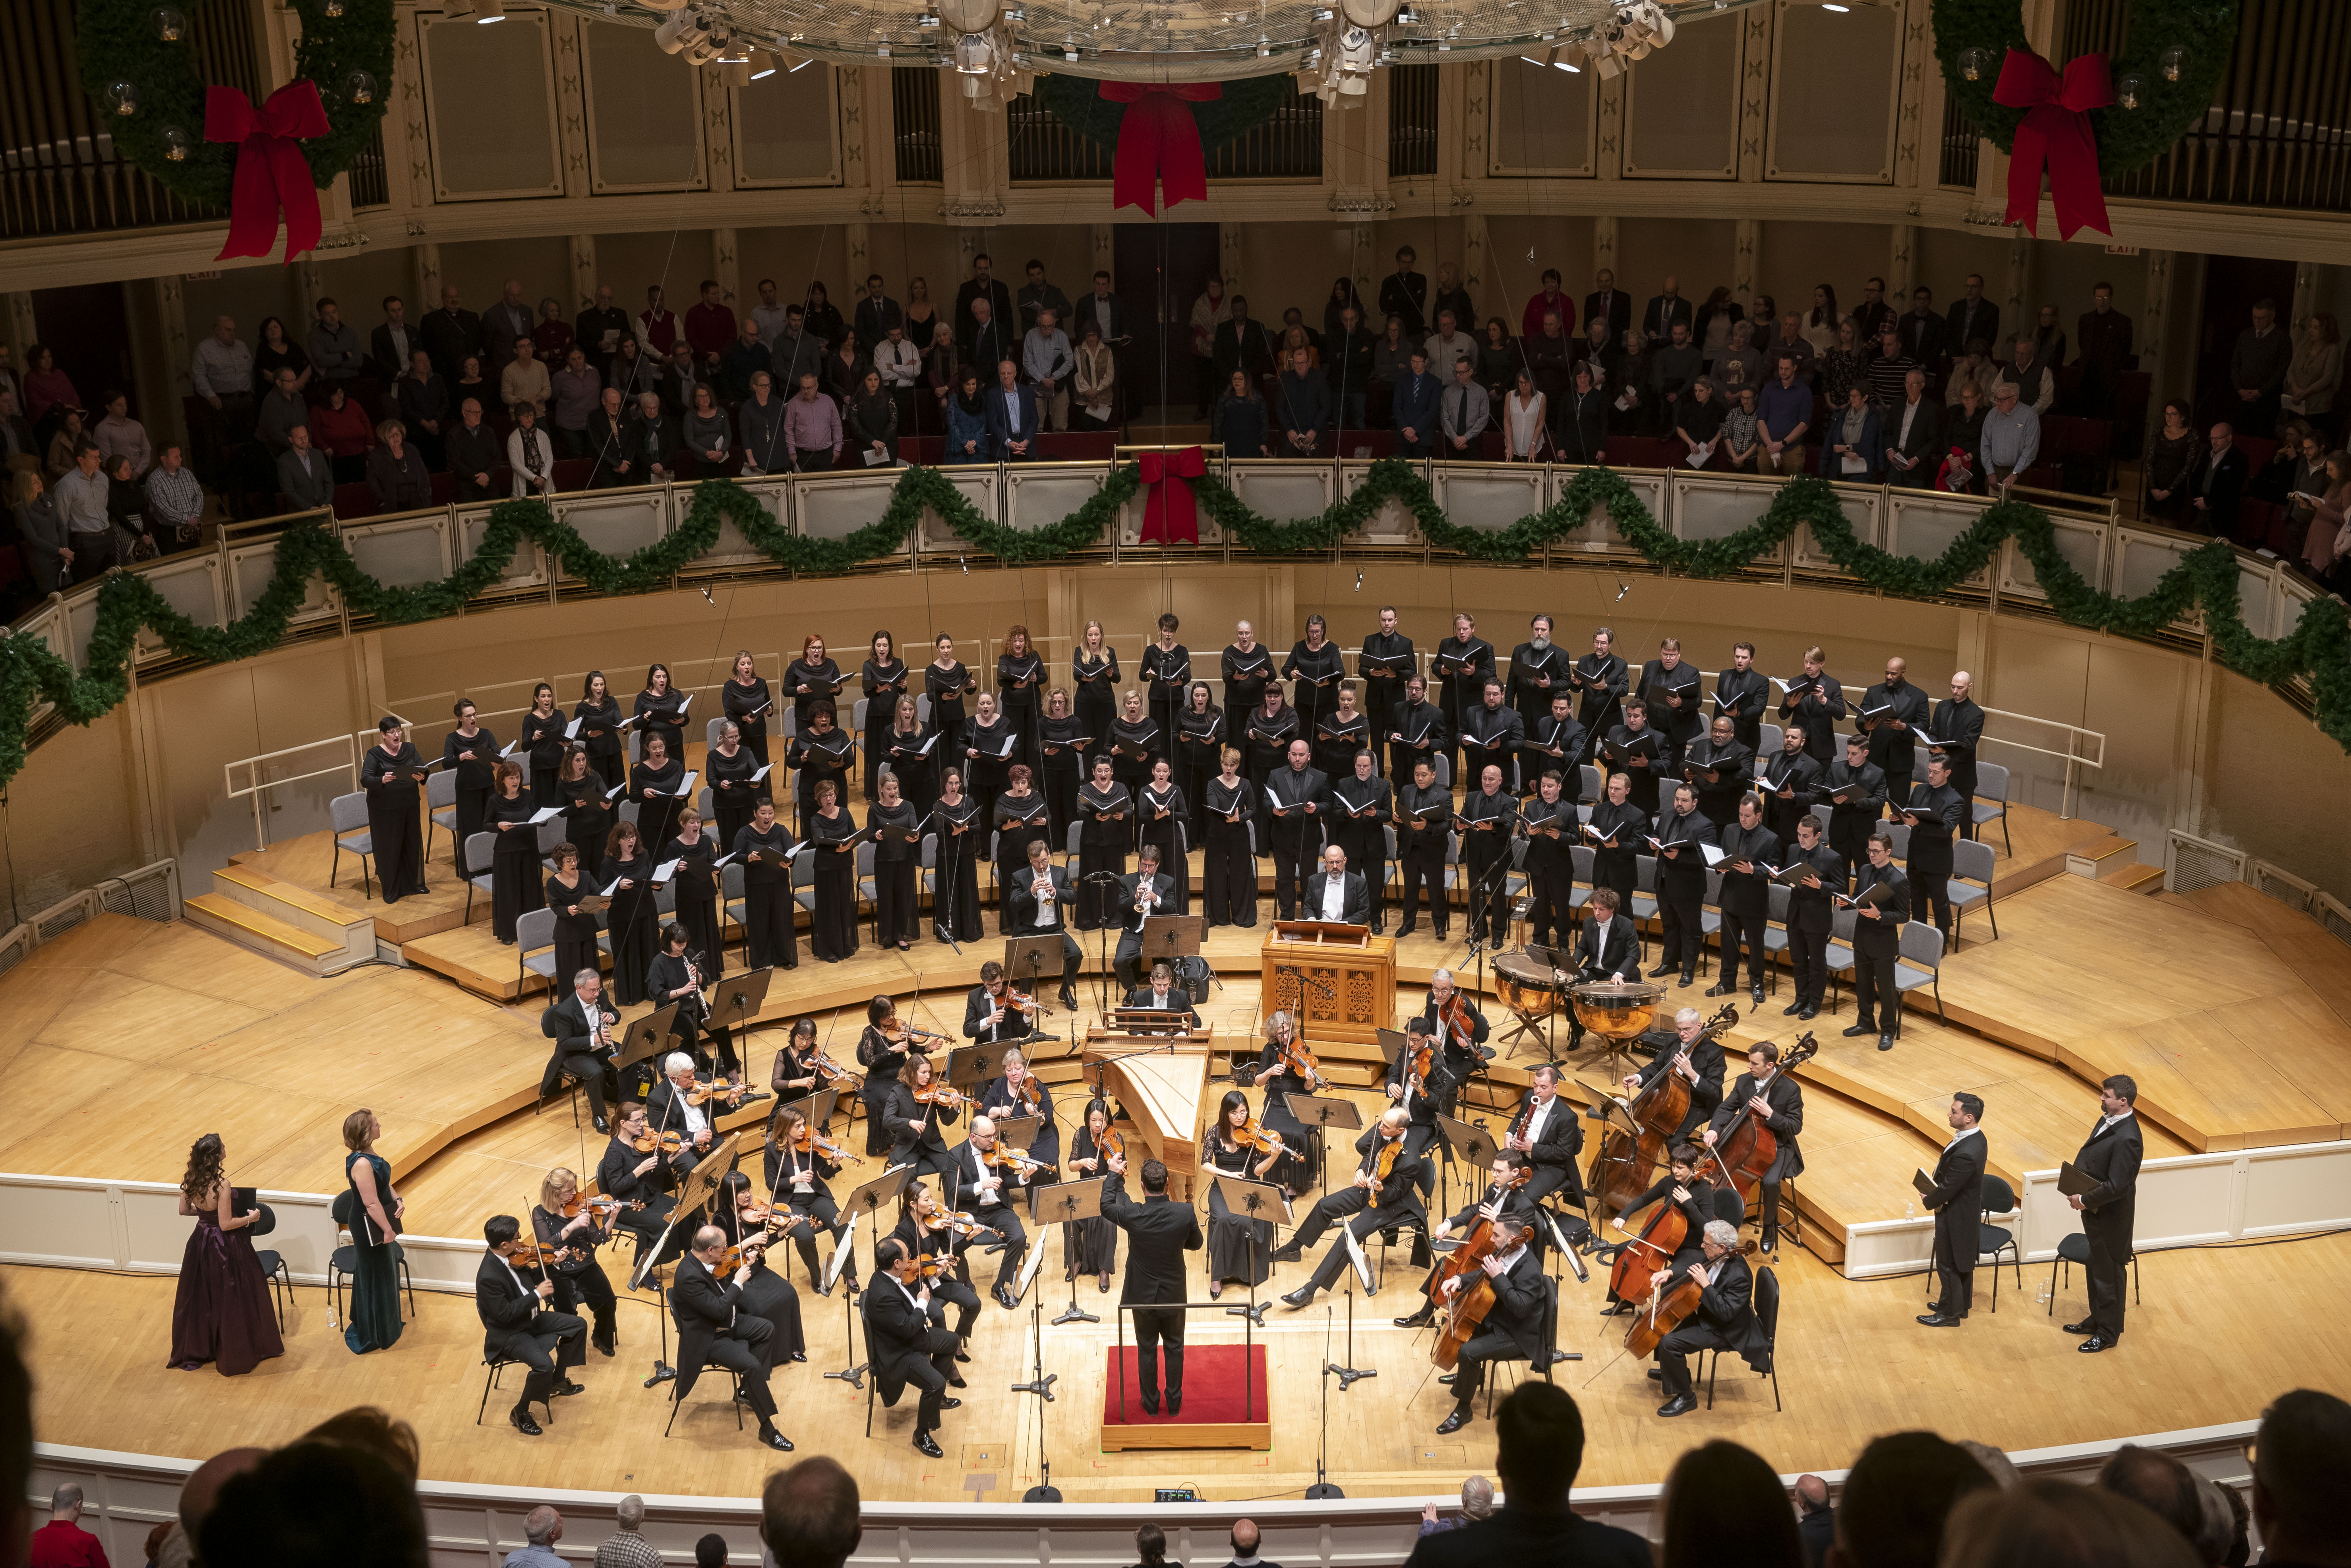 Halls Conducts Messiah Review The Chicago Symphony Orchestra And Chorus With Soloists Make